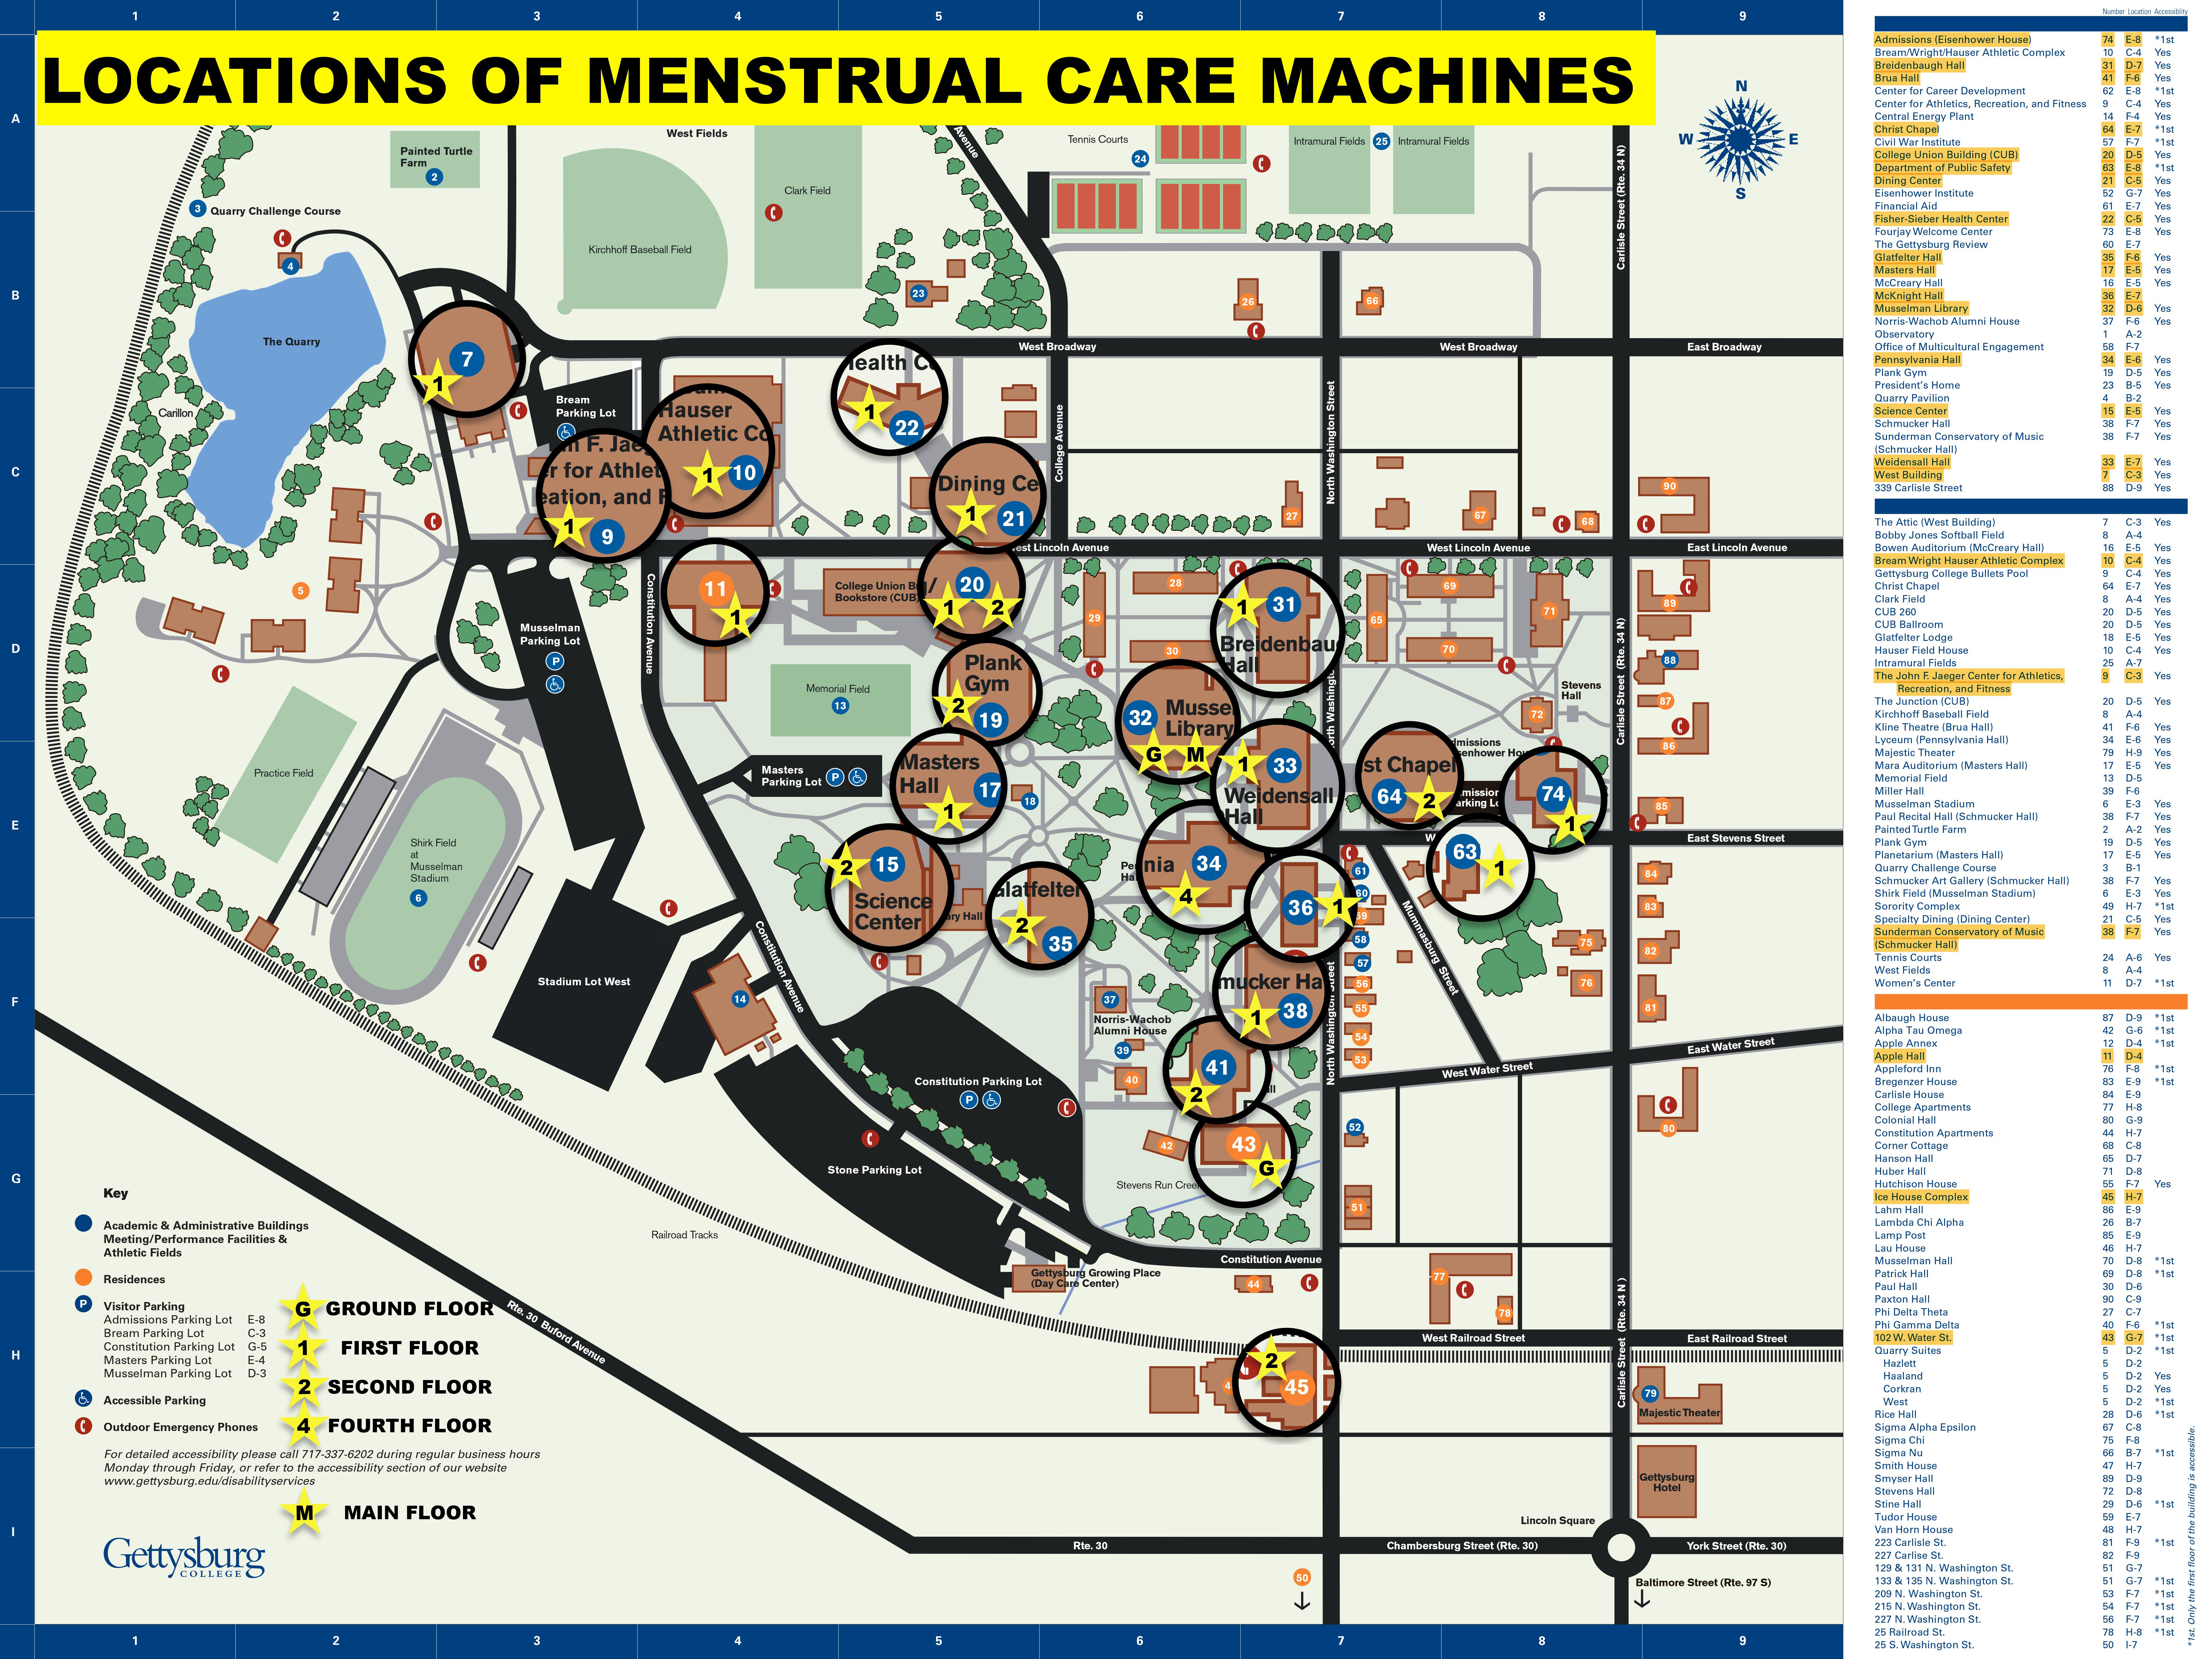 Building locations and floors of the menstrual care product machines are indicated on the map (Map courtesy of Gettysburg College).